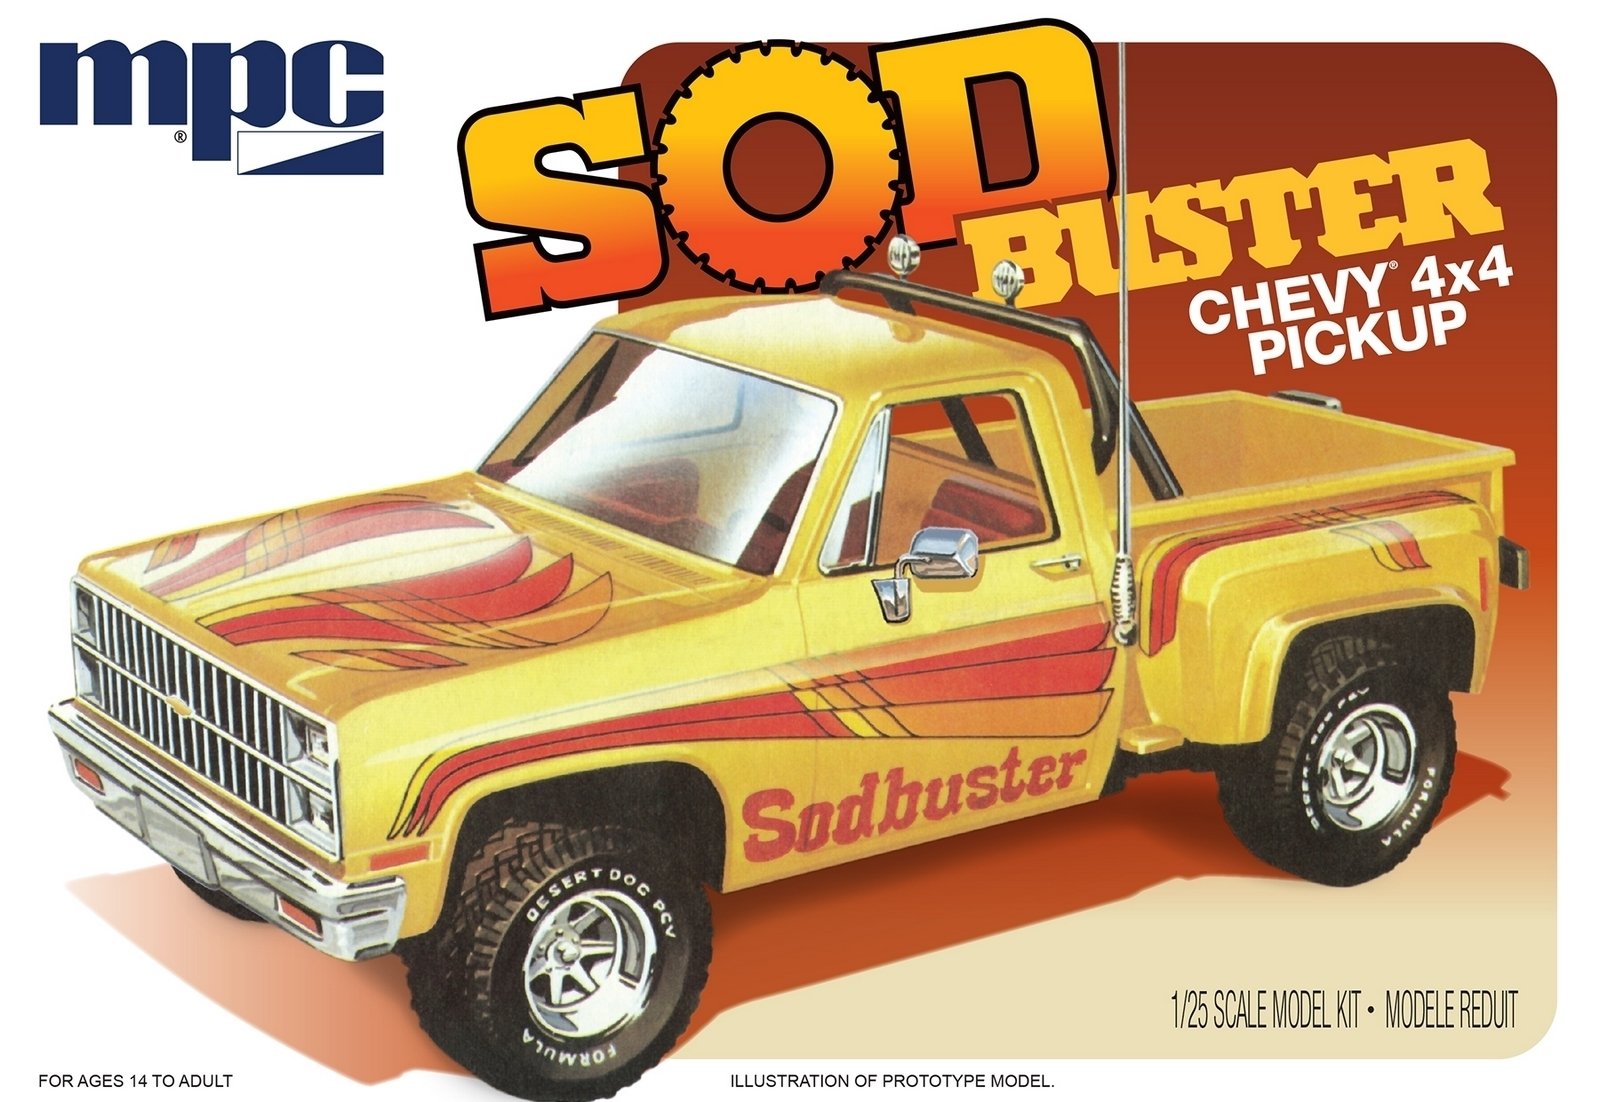 MPC 1:25 1981 Chevy Stepside Pickup SodBuster